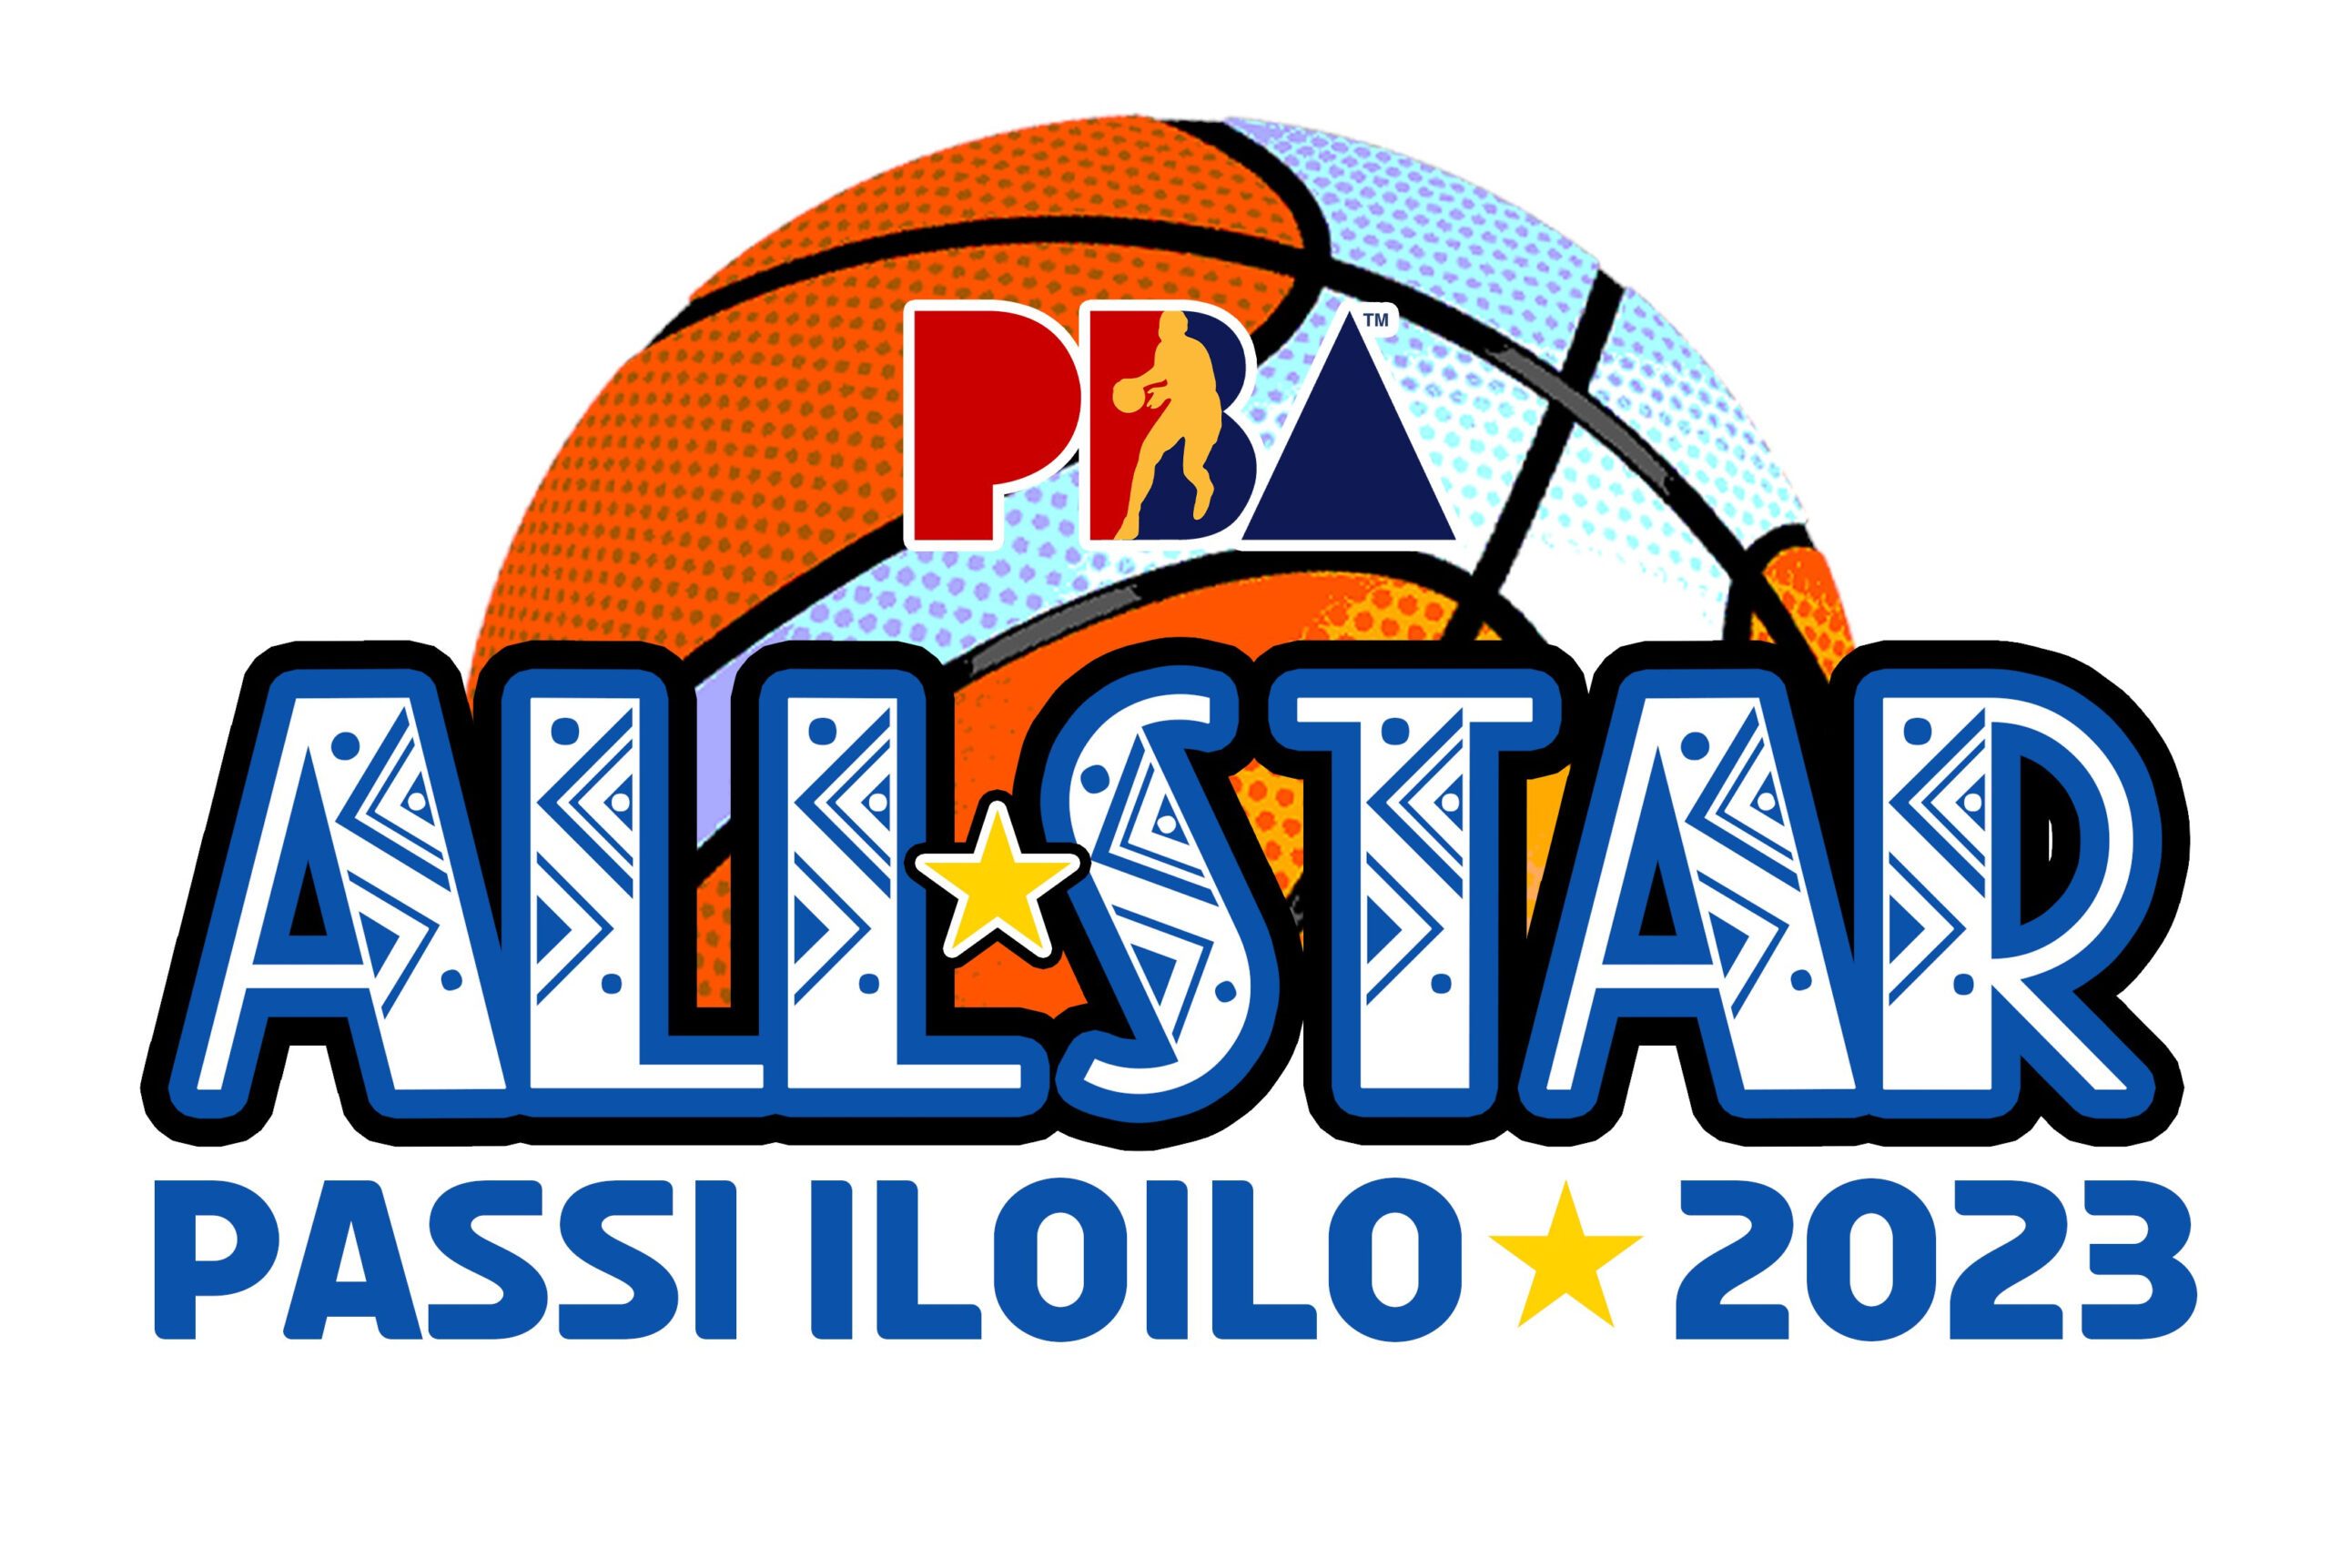 PBA introduces new format in All-Star return